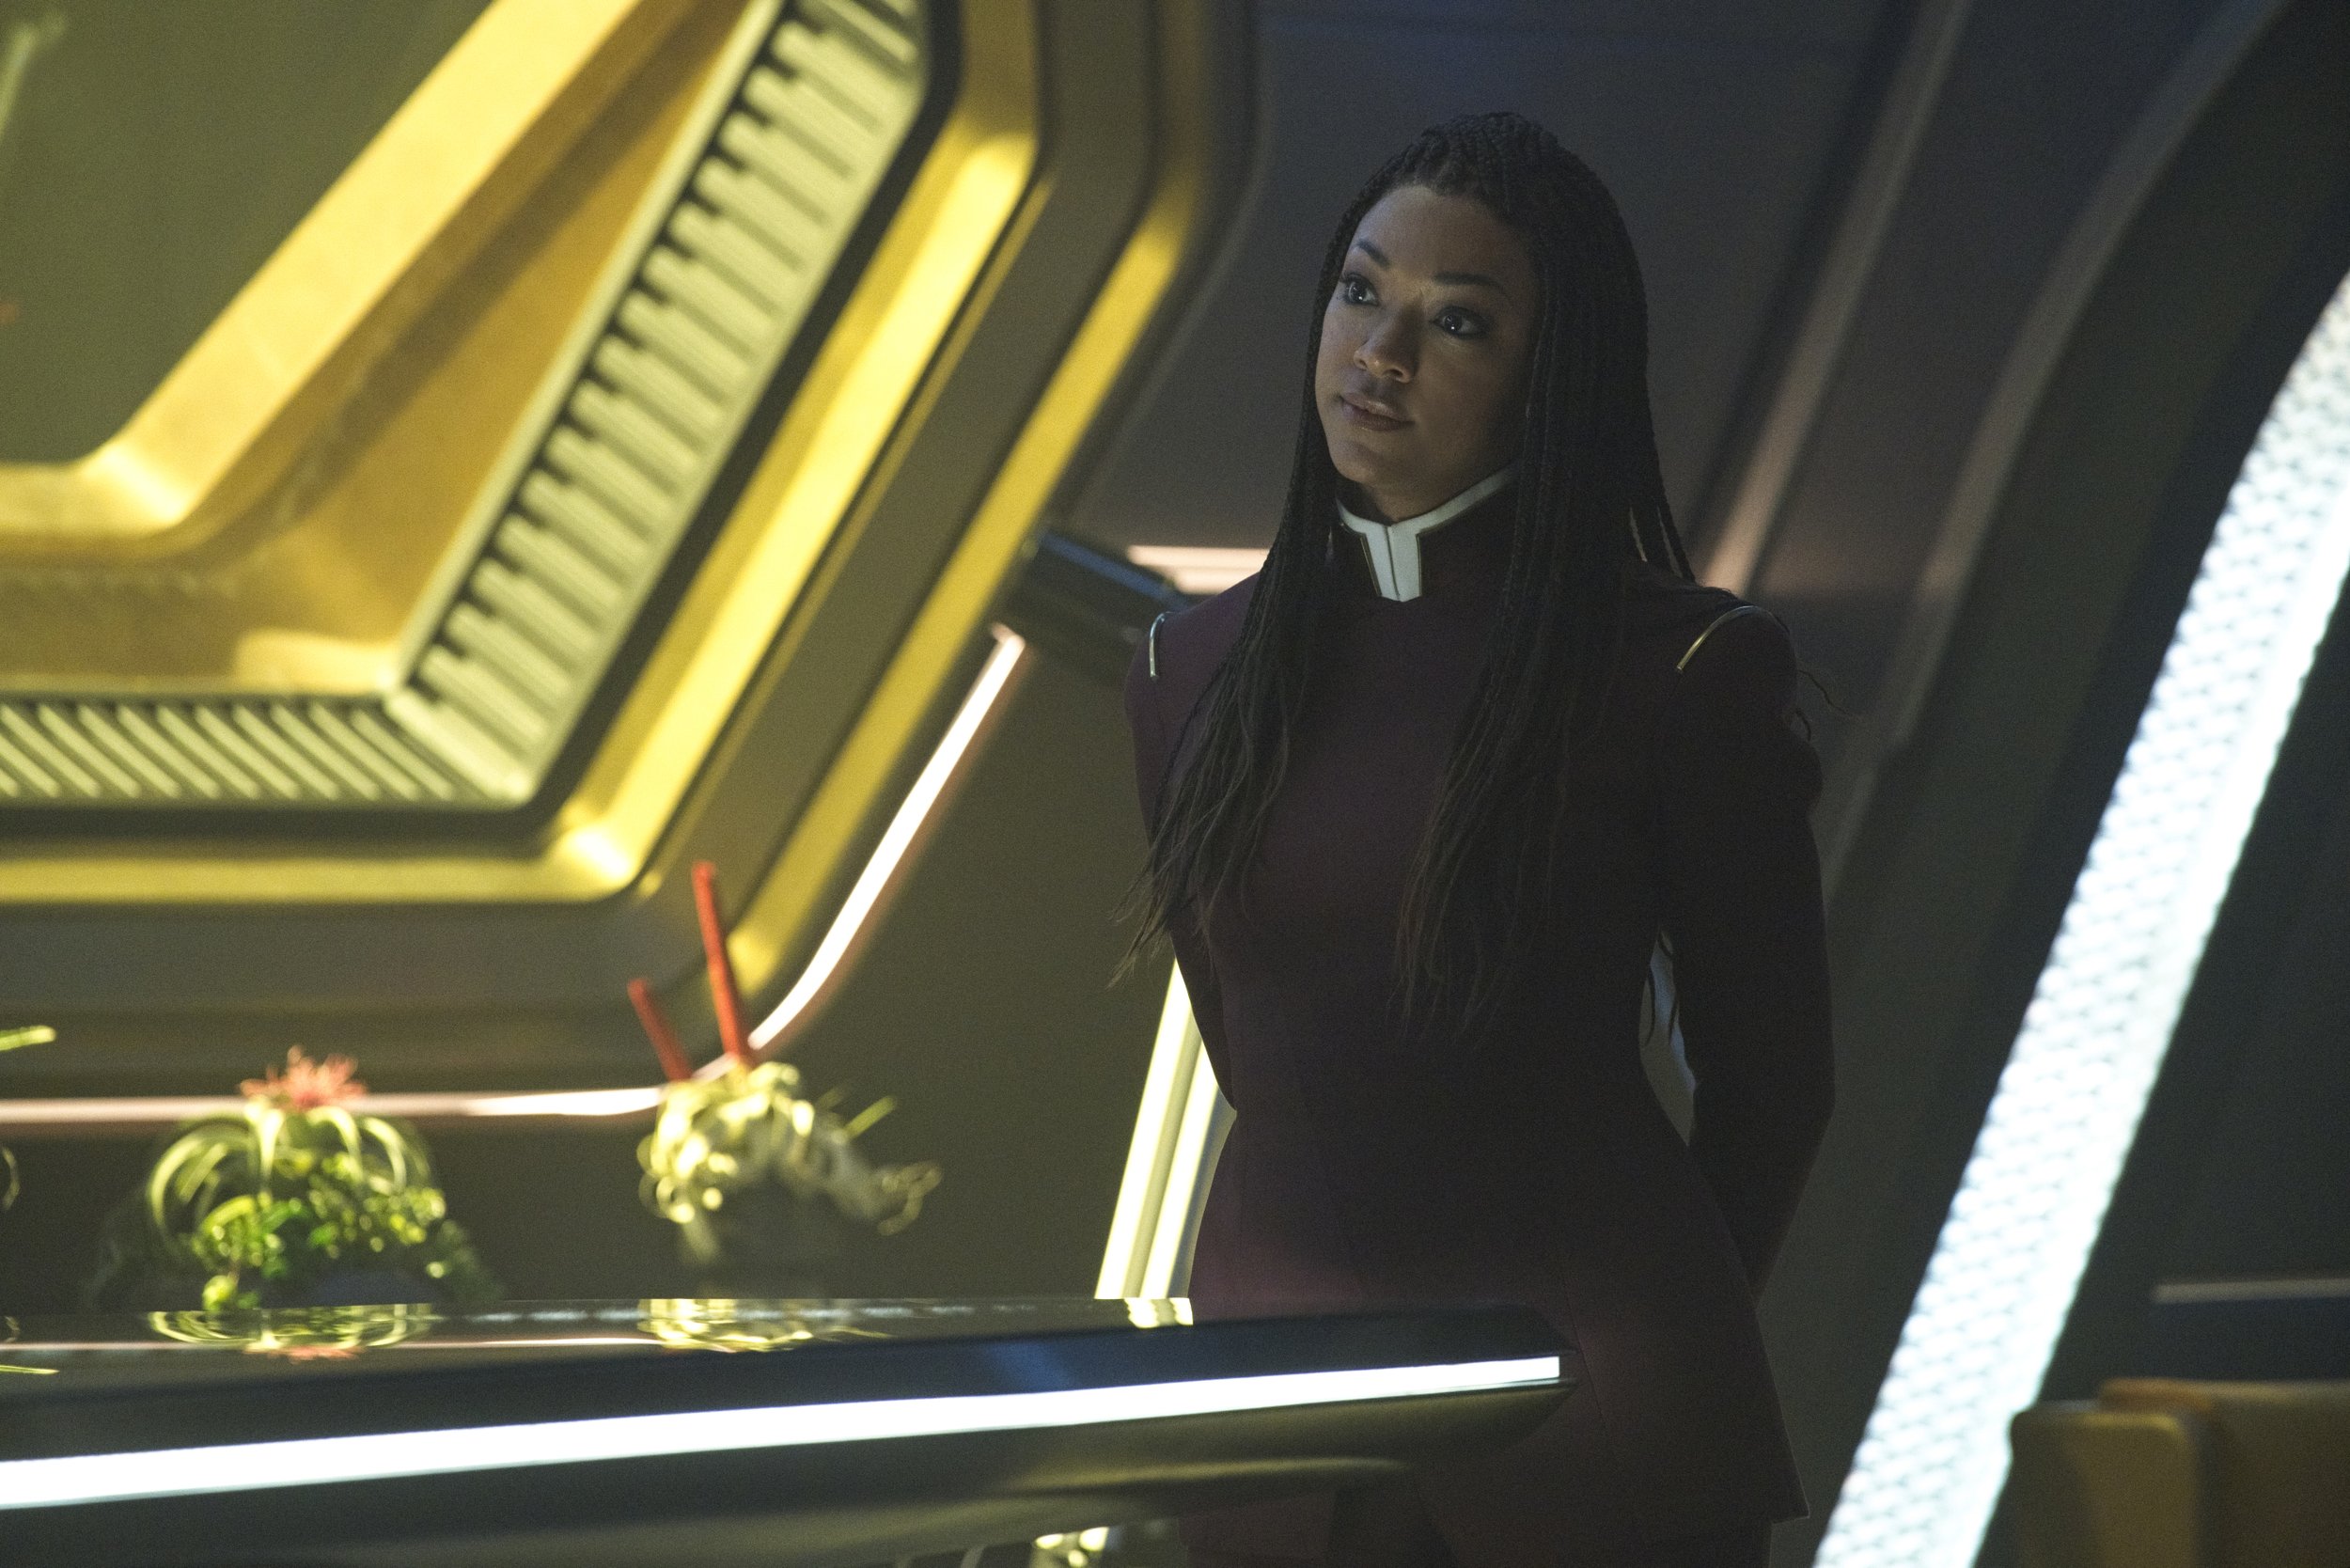   Pictured: Sonequa Martin Green as Burnham of the Paramount+ original series STAR TREK: DISCOVERY. Photo Cr: Michael Gibson/Paramount+ © 2021 CBS Interactive. All Rights Reserved.  